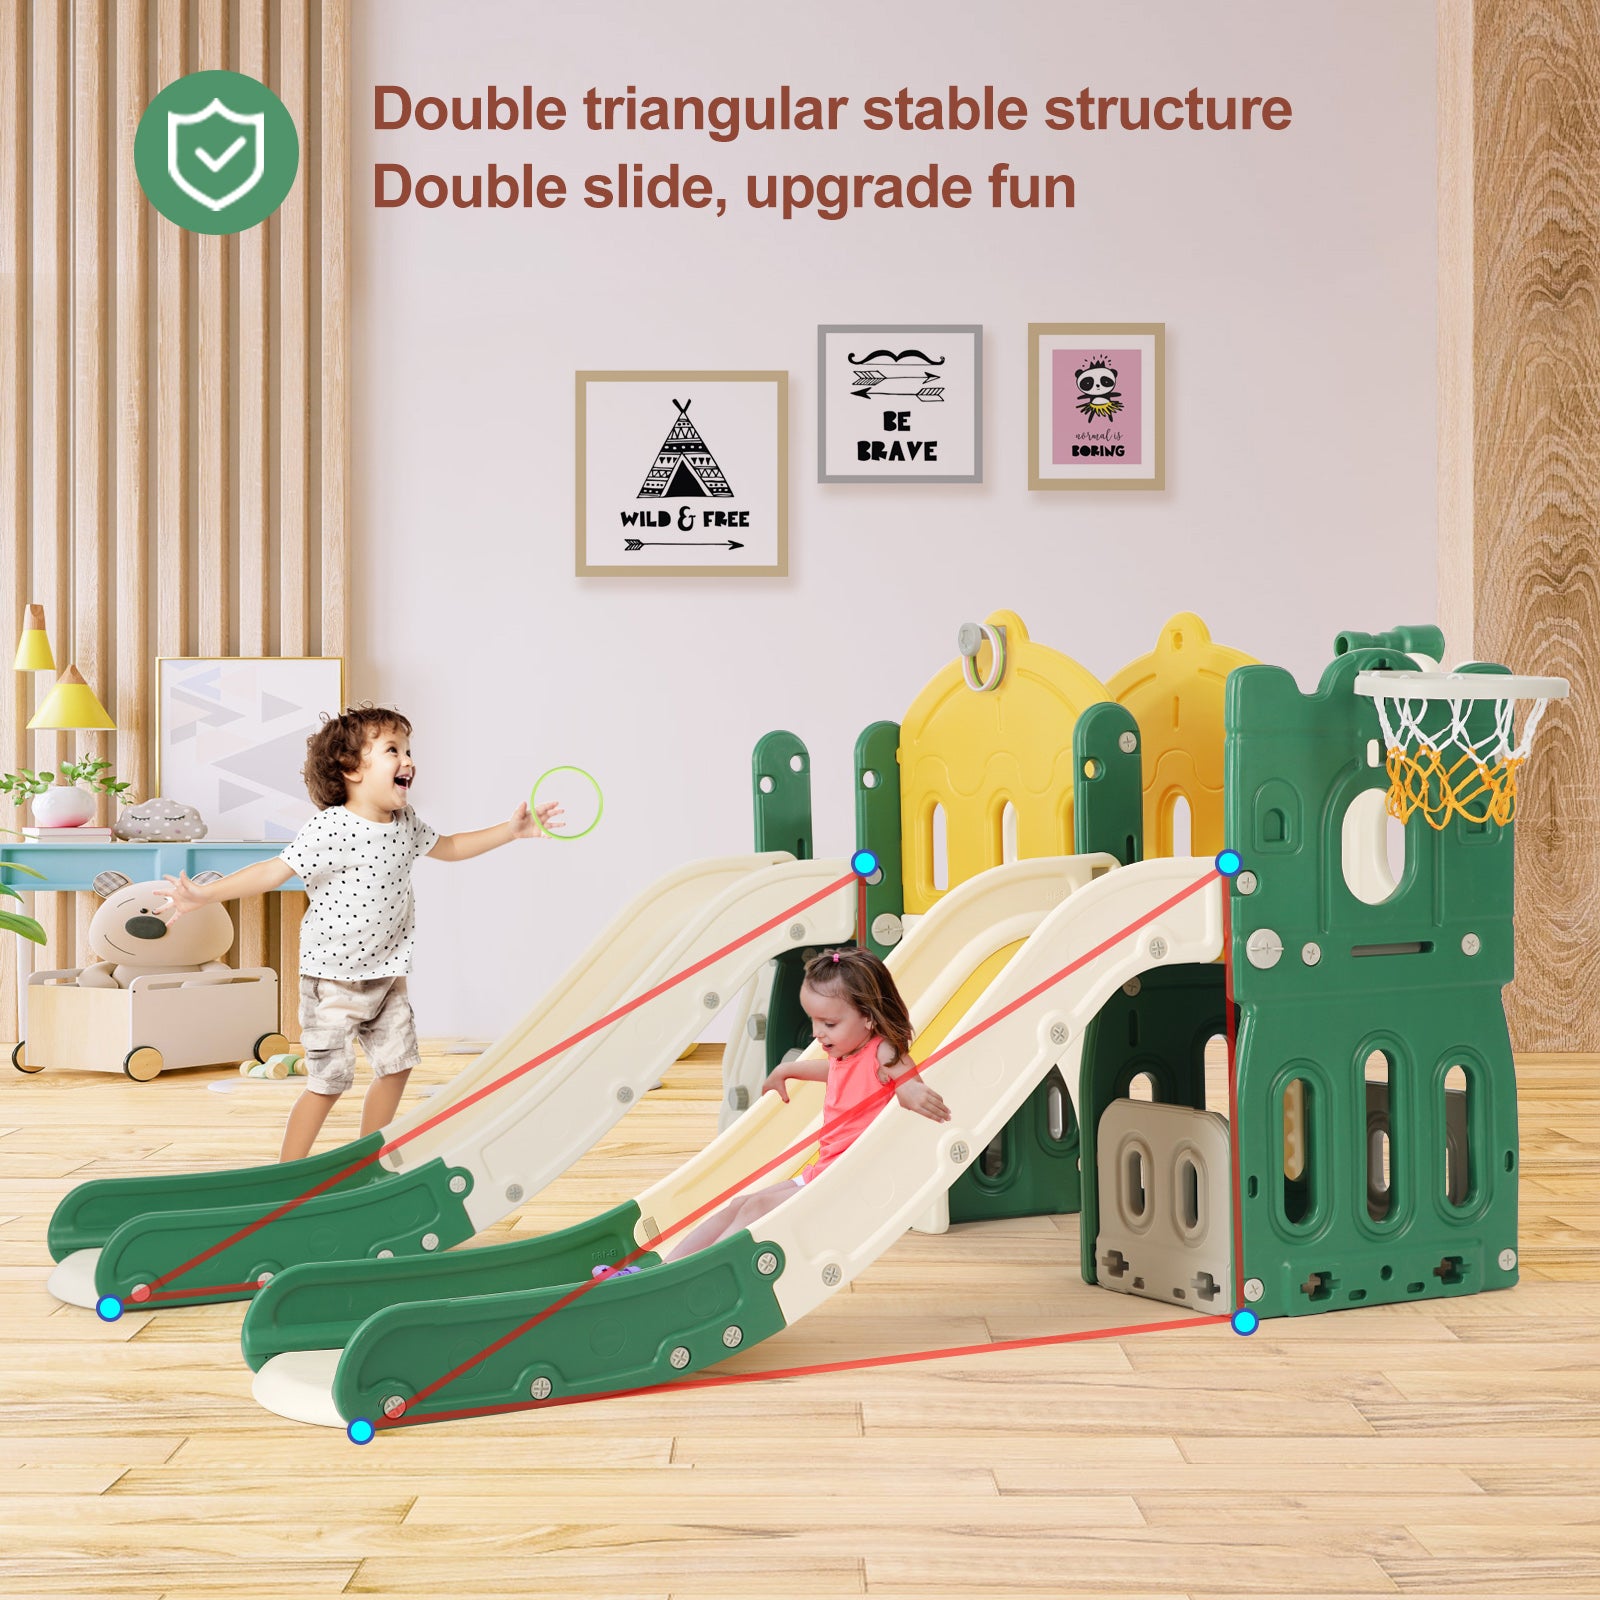 #1165  9 in 1 Toddler Slide, Toddler Playground with Double Slides, Climber,Basketball Hoop,Tunnel, Telescope, Storage Space and Non-Slip Step, Indoor Outdoor Backyard Playset for Toddlers Age 1-3+